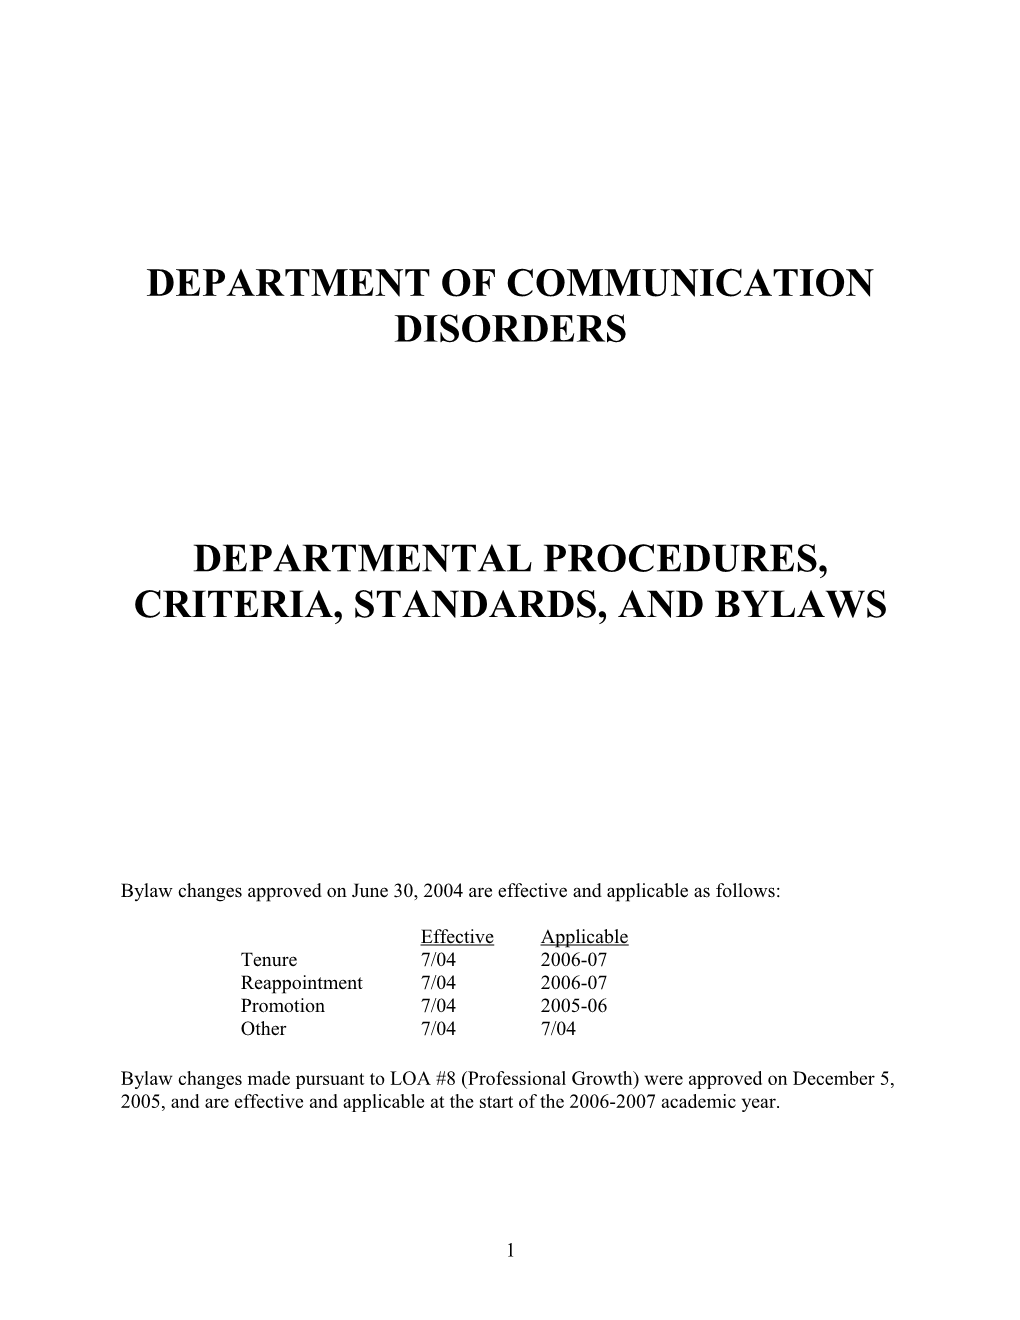 Department of Communication Disorders